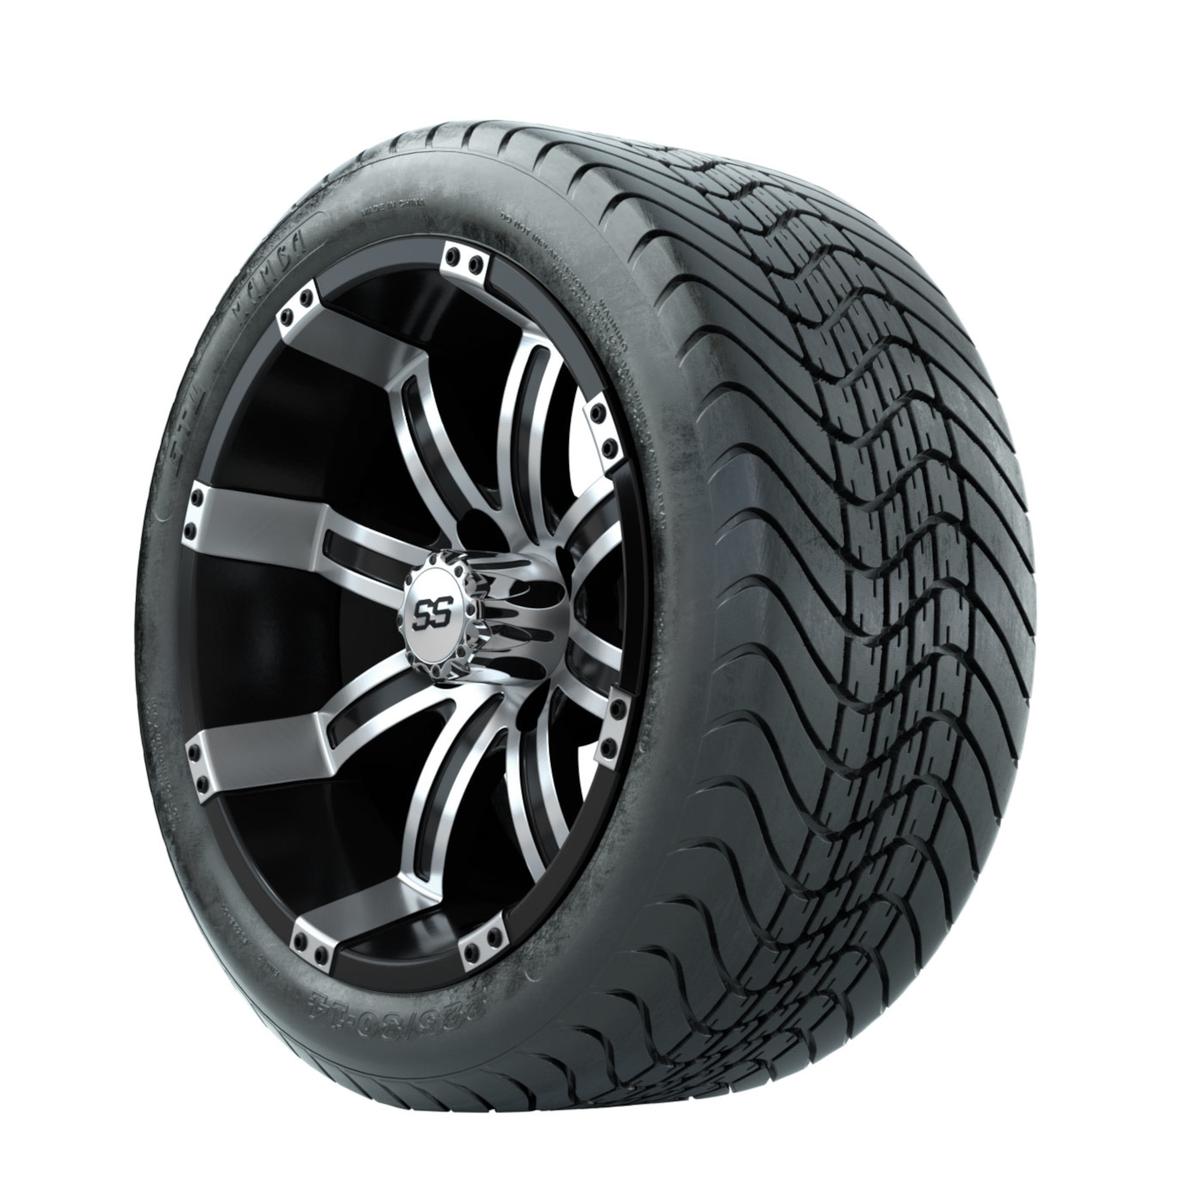 14” GTW Tempest Machined/Black Wheels with Mamba Street Tires – Set of 4